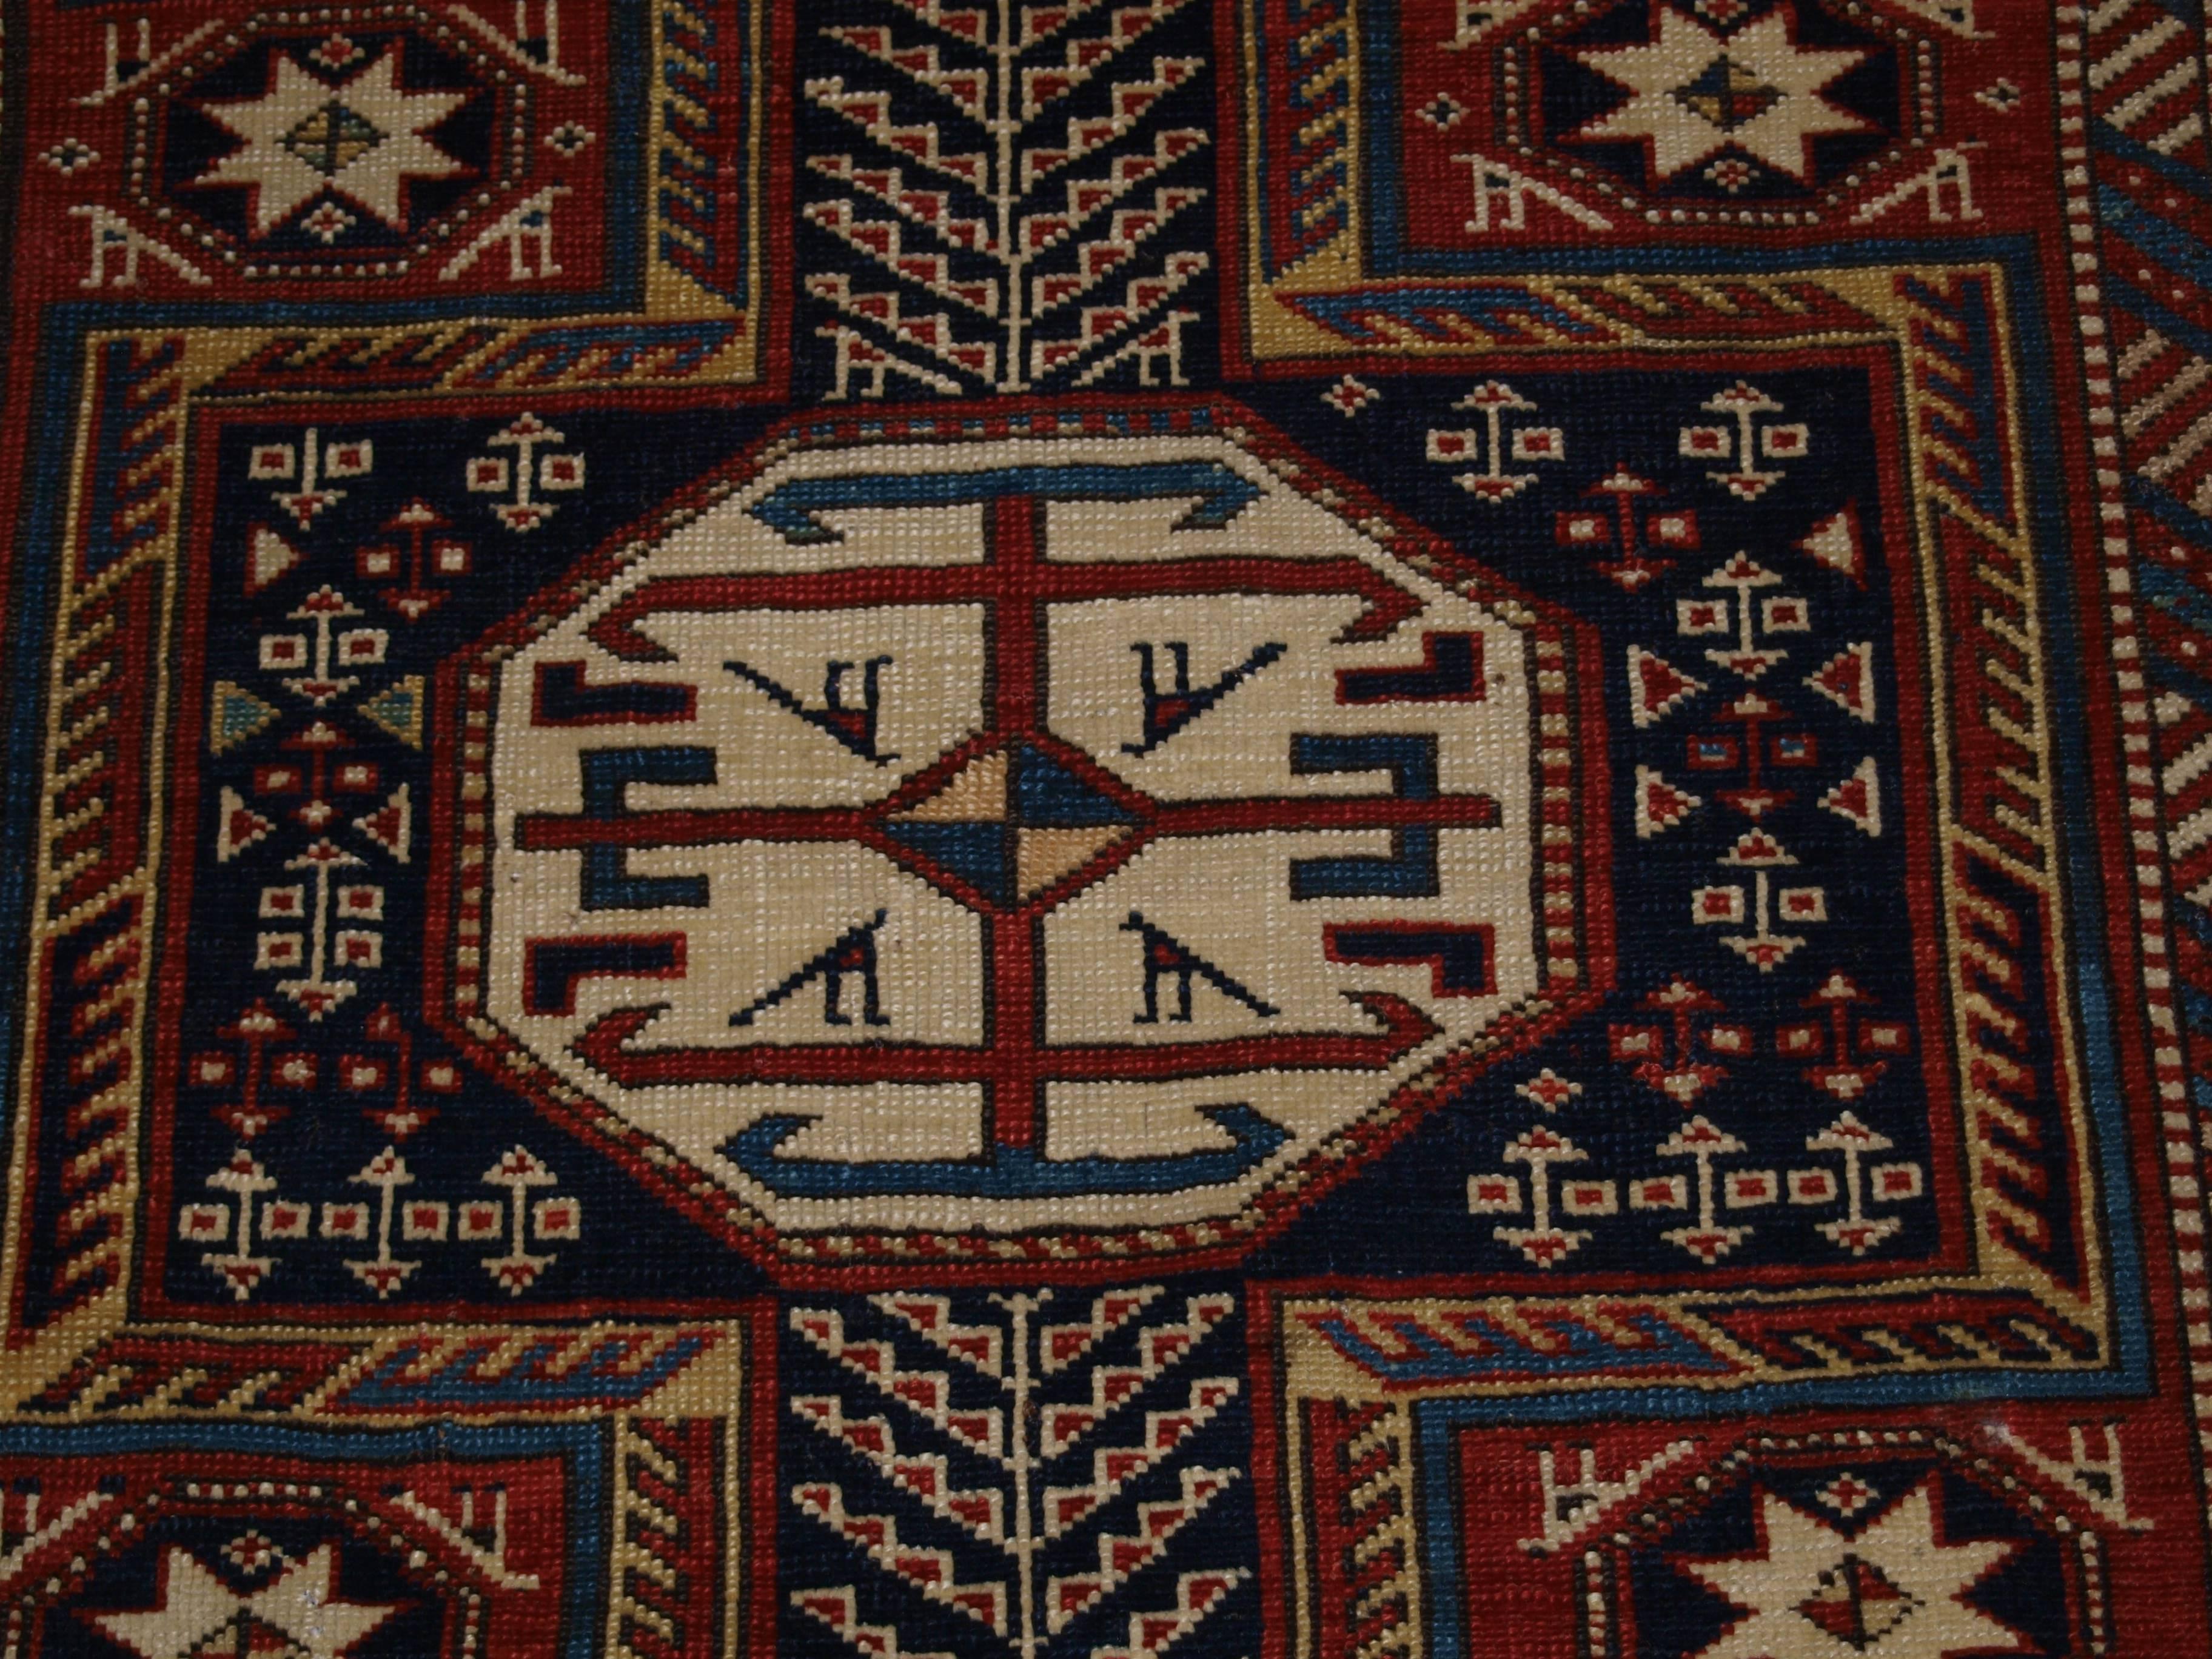 Antique Caucasian Shirvan Rug with 'Surahani' Garden Design, Late 19th Century For Sale 5